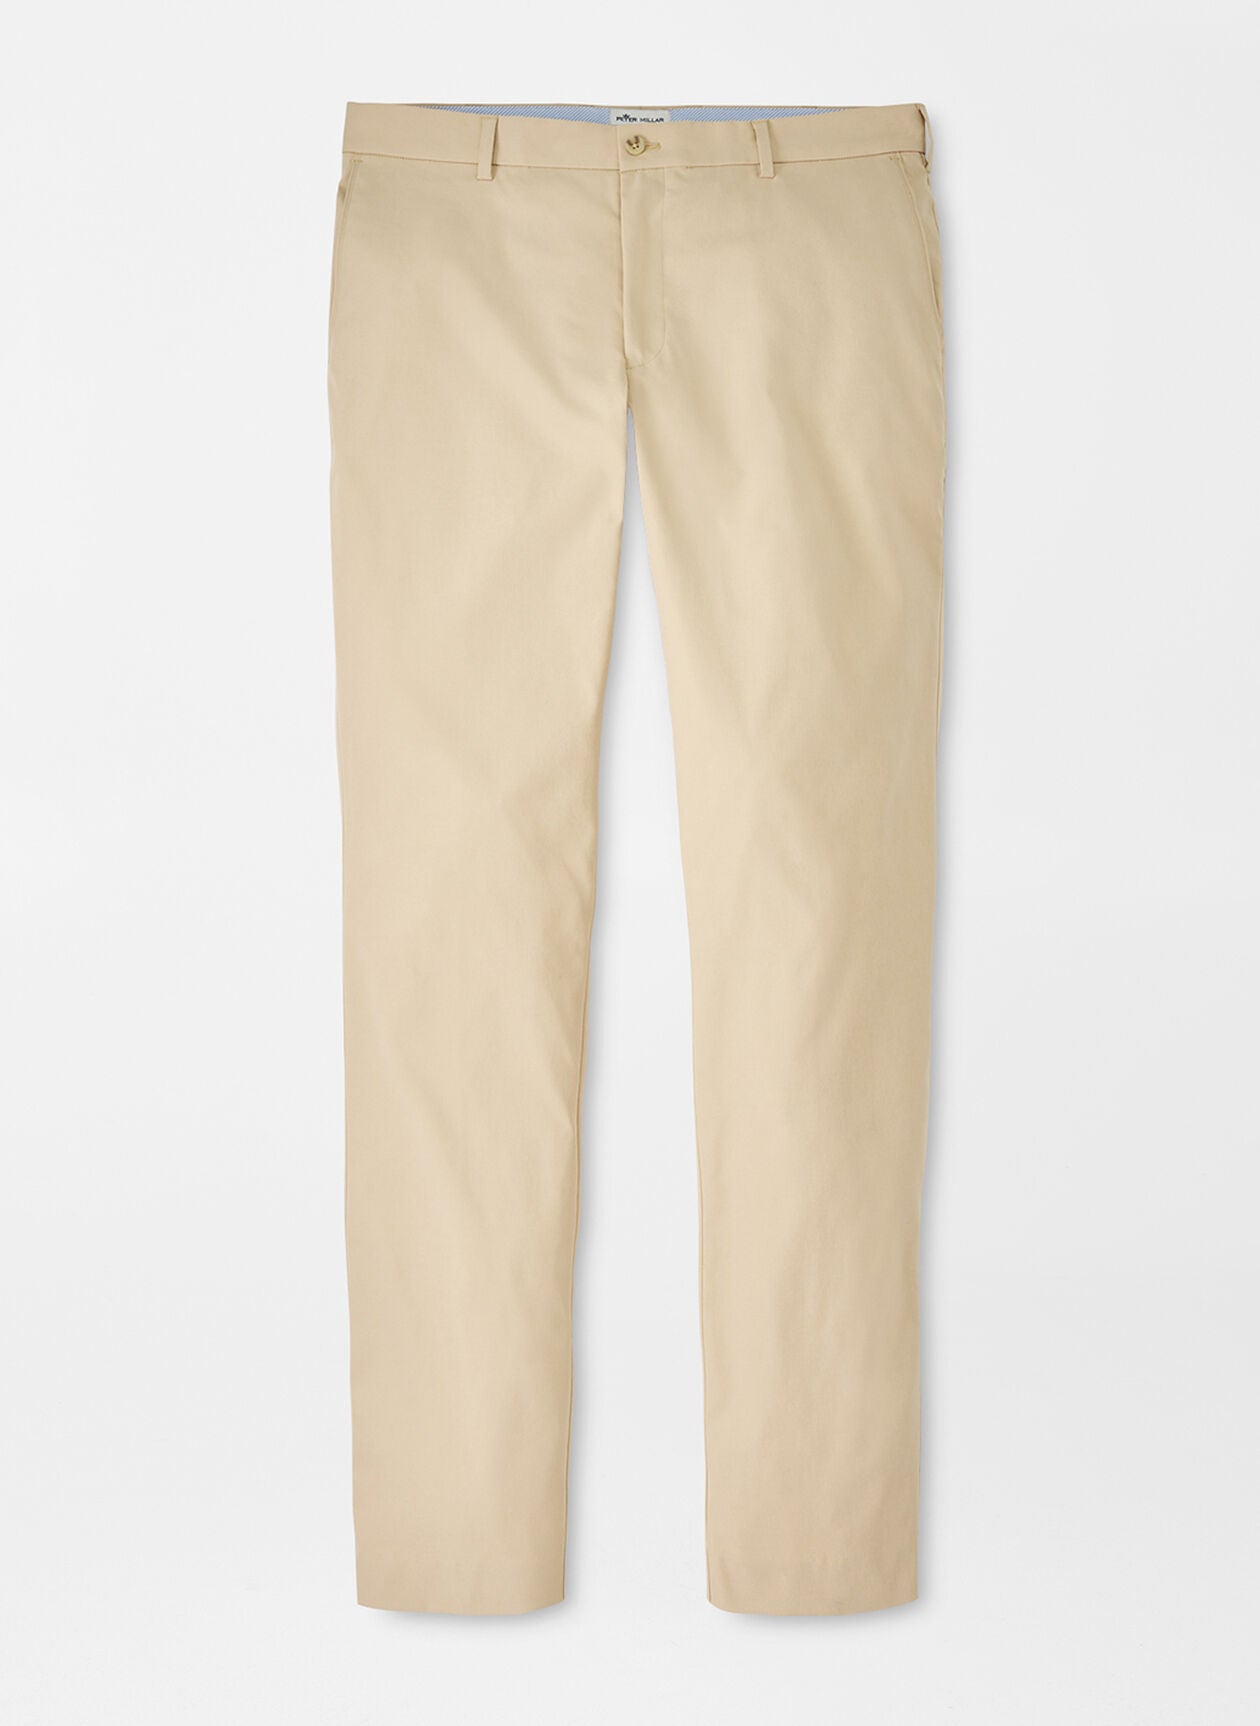 Peter Millar Raleigh Performance Trouser In Macadamia – The Oxford